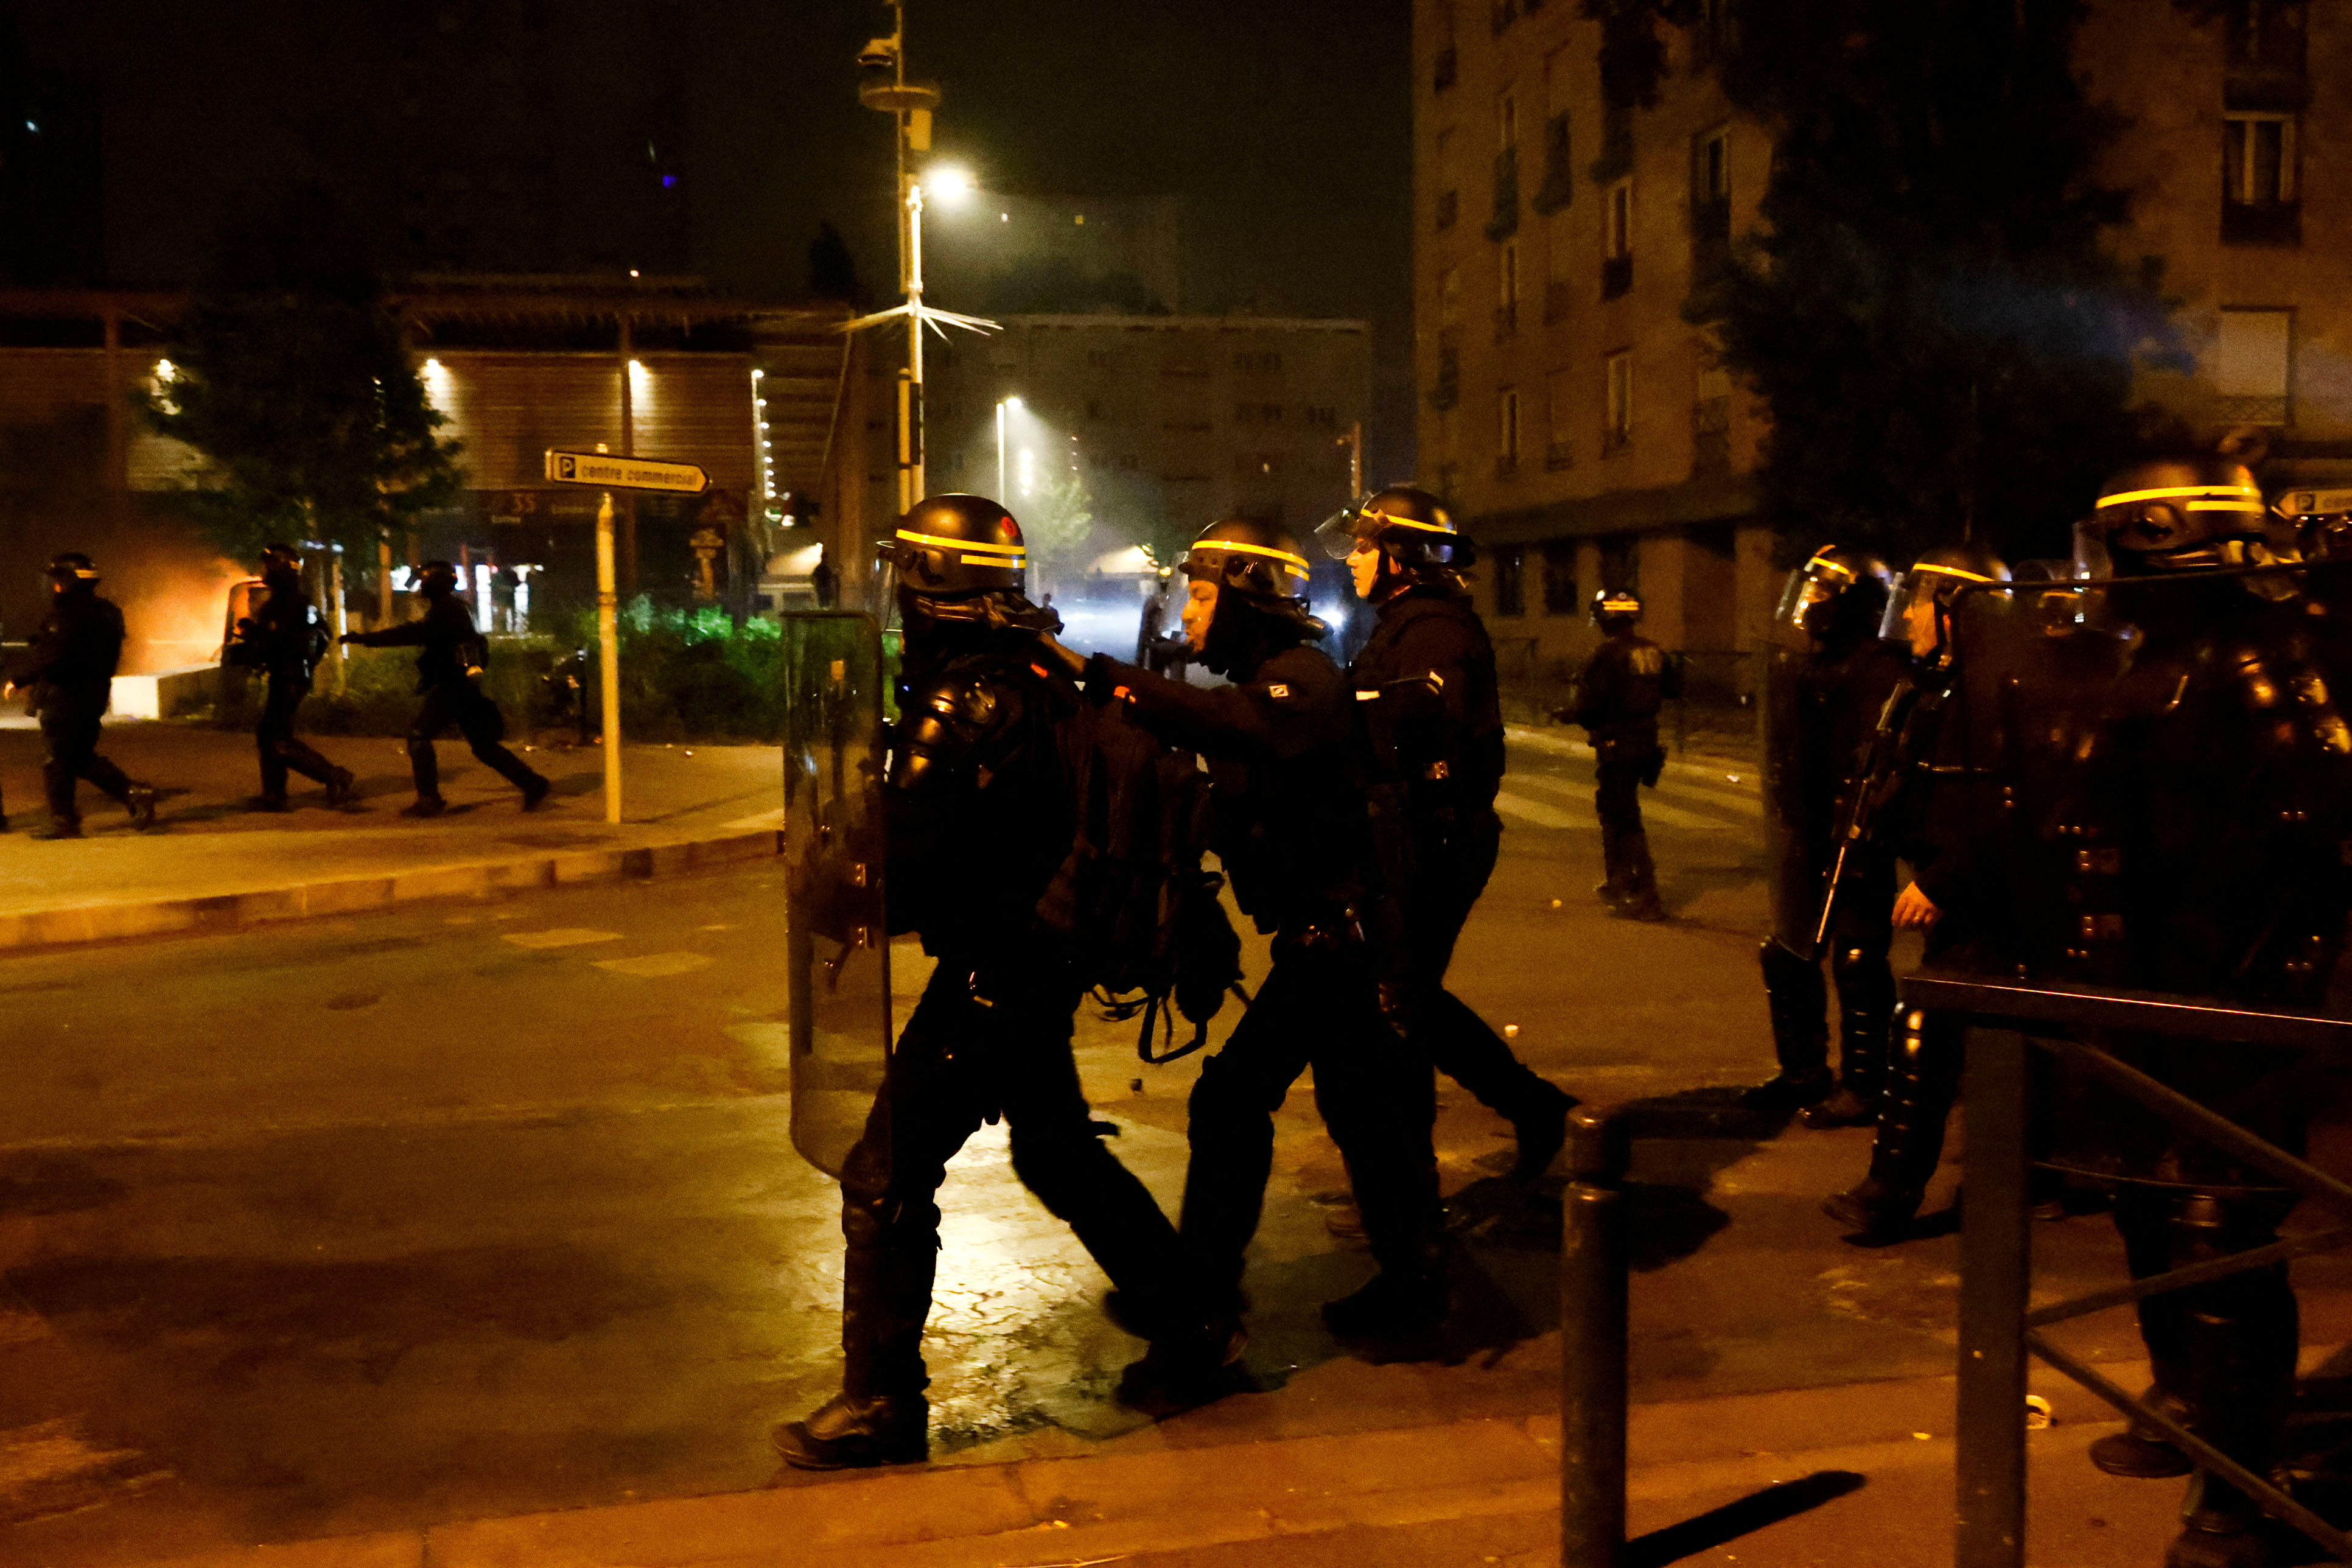 French police, long unreformed, under scrutiny after teenager's